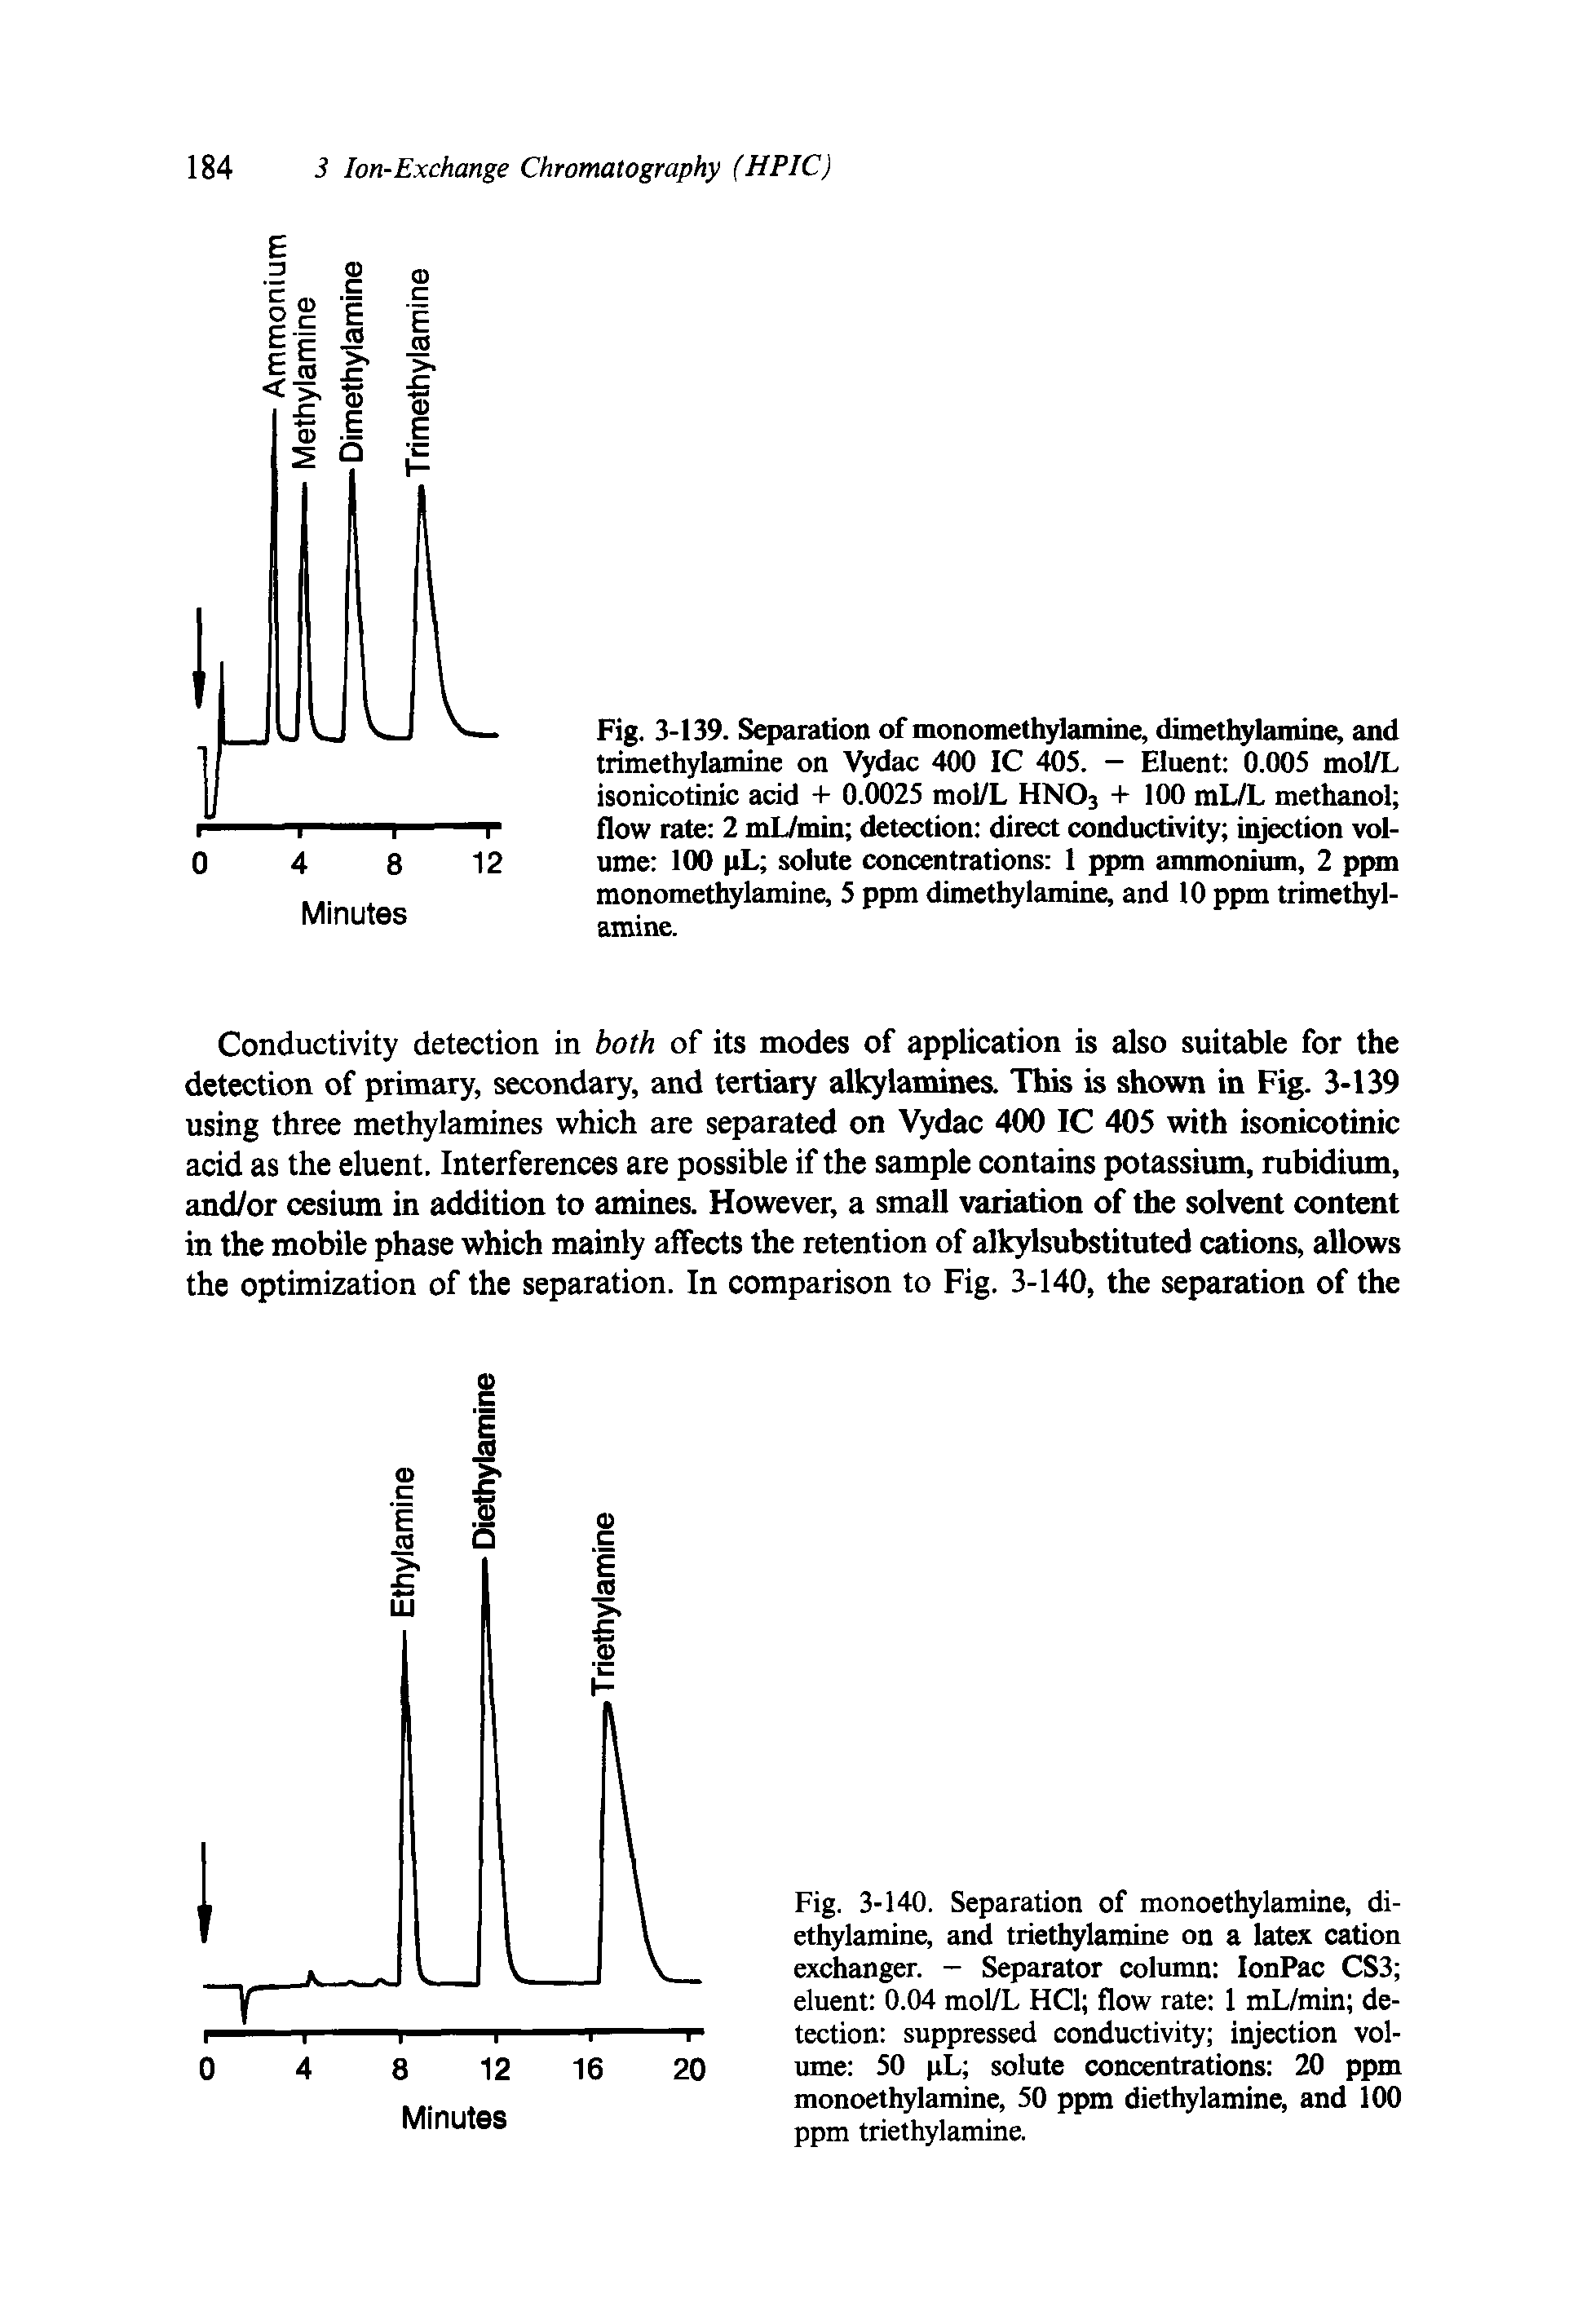 Fig. 3-139. Separation of monomethylamine, dimethylamine, and trimethylamine on Vydac 400 IC 405. — Eluent 0.005 mol/L isonicotinic acid + 0.0025 mol/L HN03 + 100 mL/L methanol flow rate 2 mL/min detection direct conductivity injection volume 100 pL solute concentrations 1 ppm ammonium, 2 ppm monomethylamine, 5 ppm dimethylamine, and 10 ppm trimethylamine.